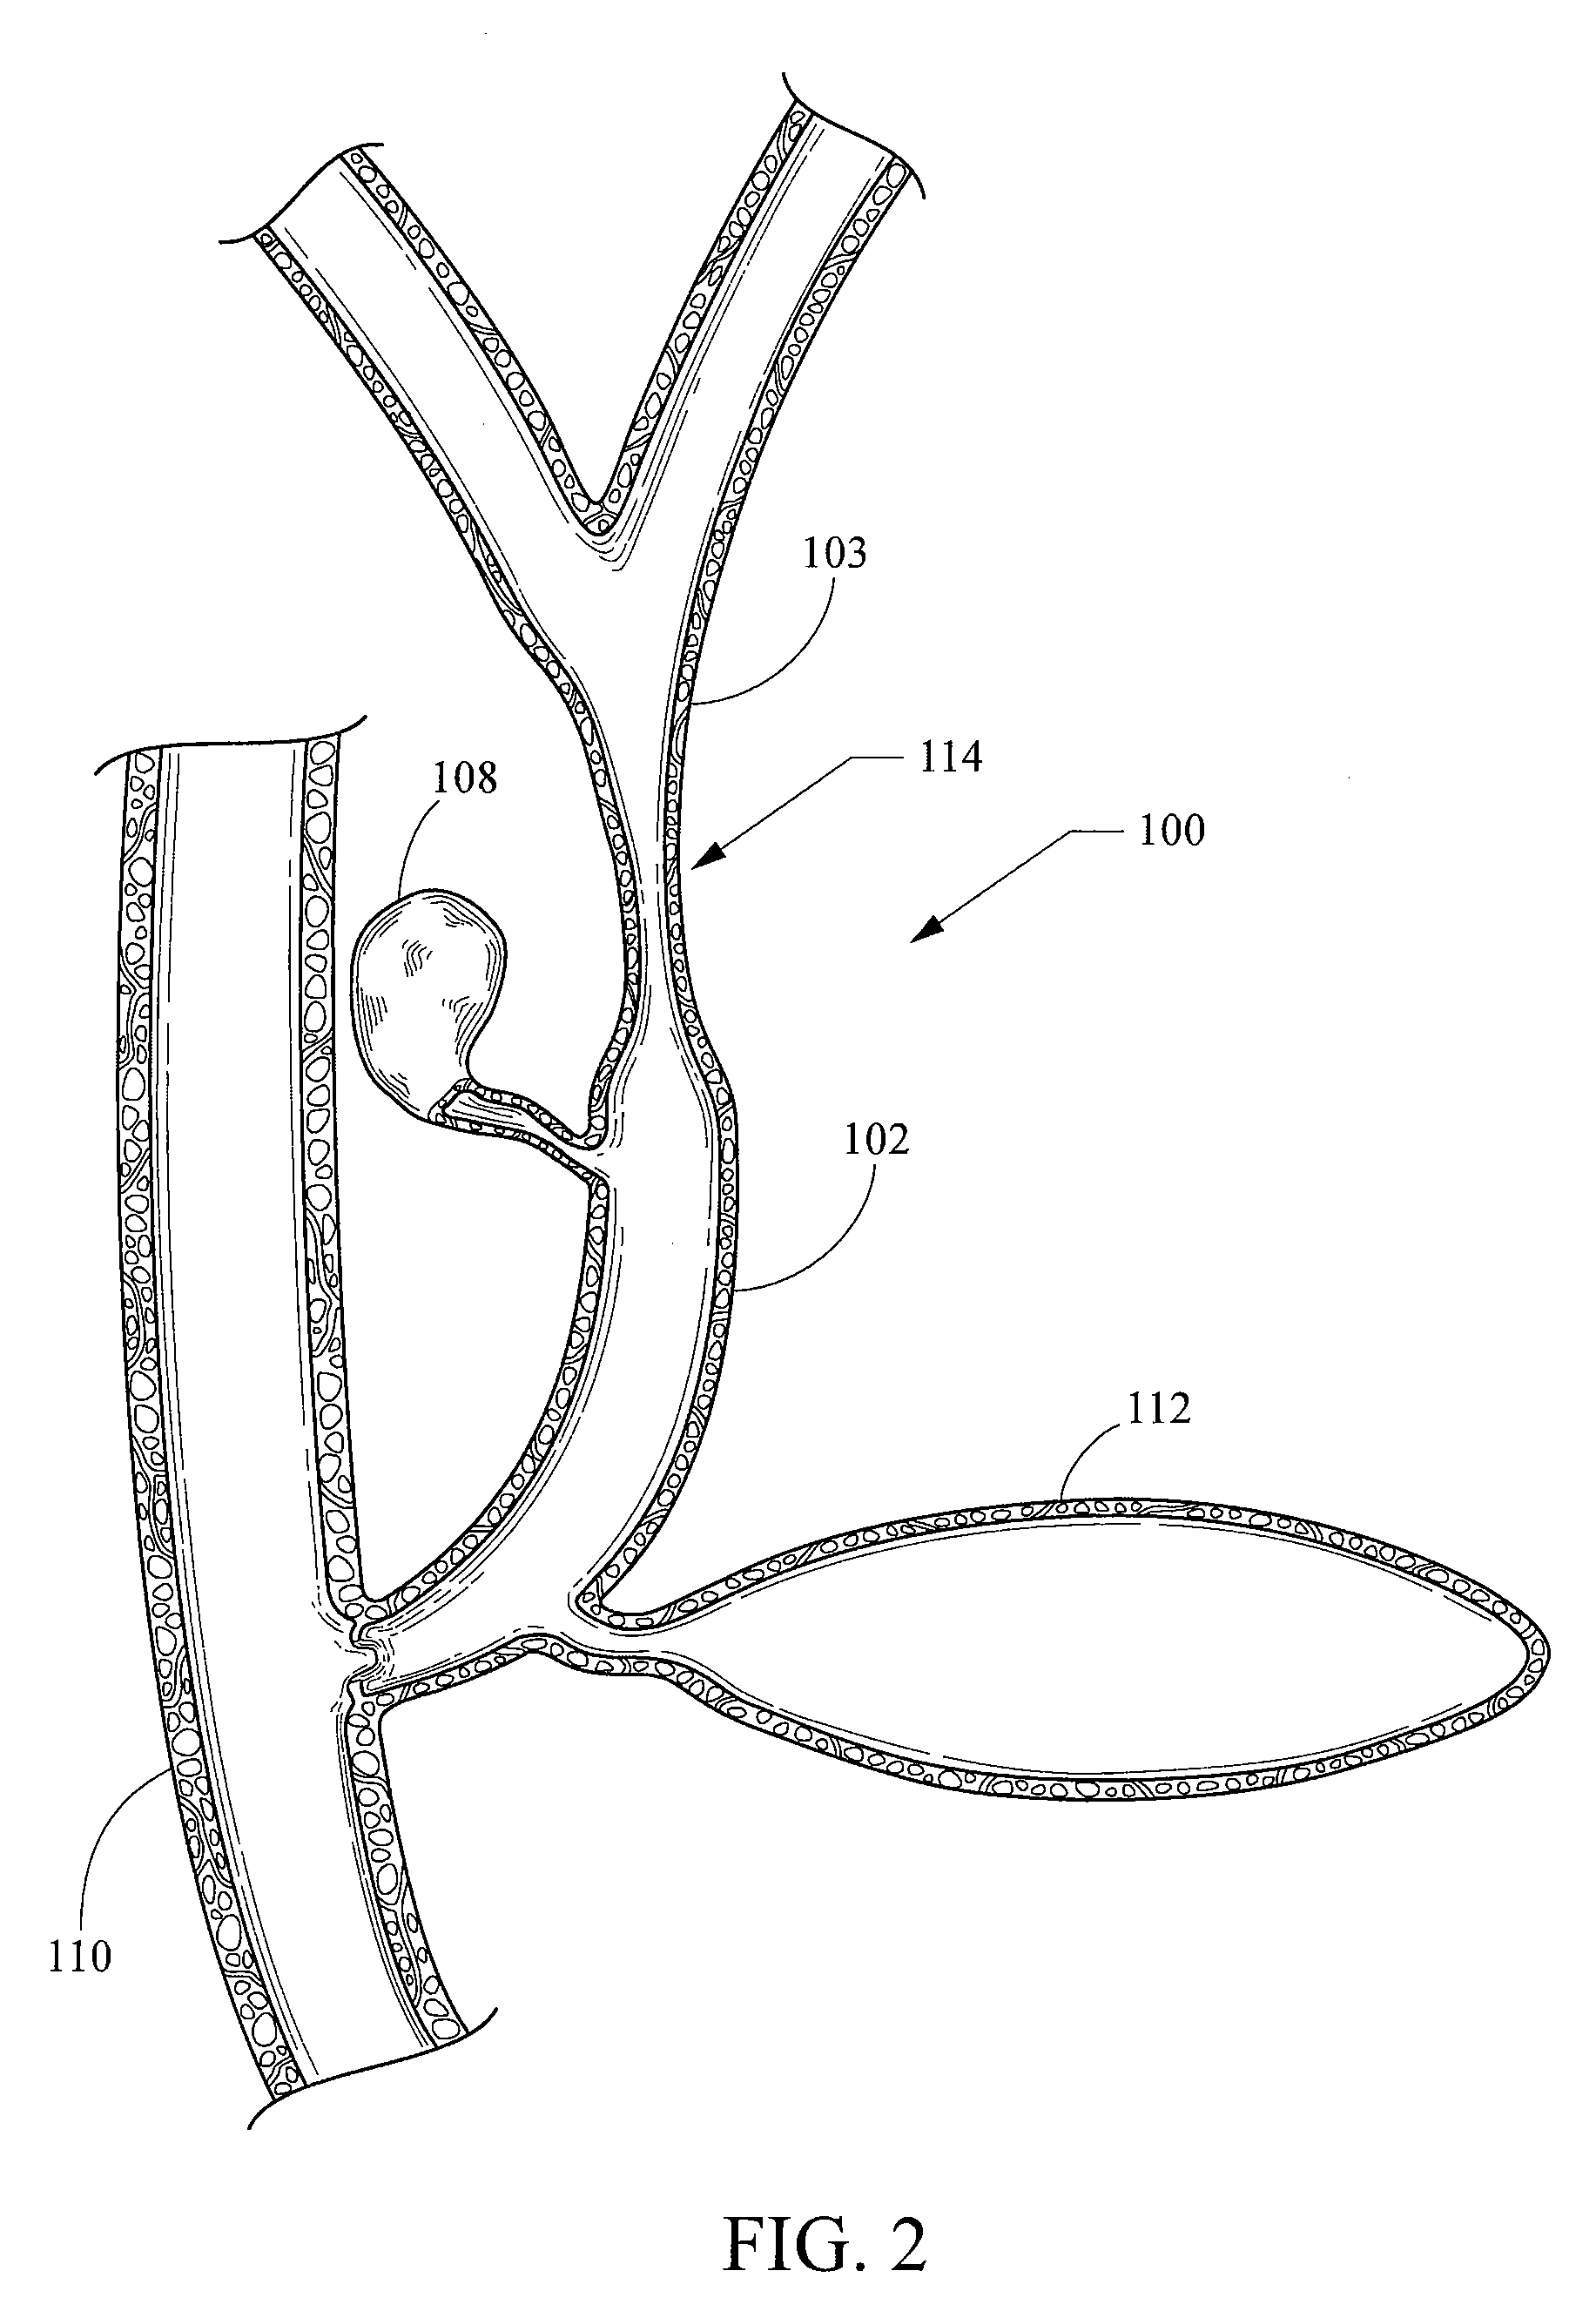 Endoscopic ultrasound-guided stent placement device and method